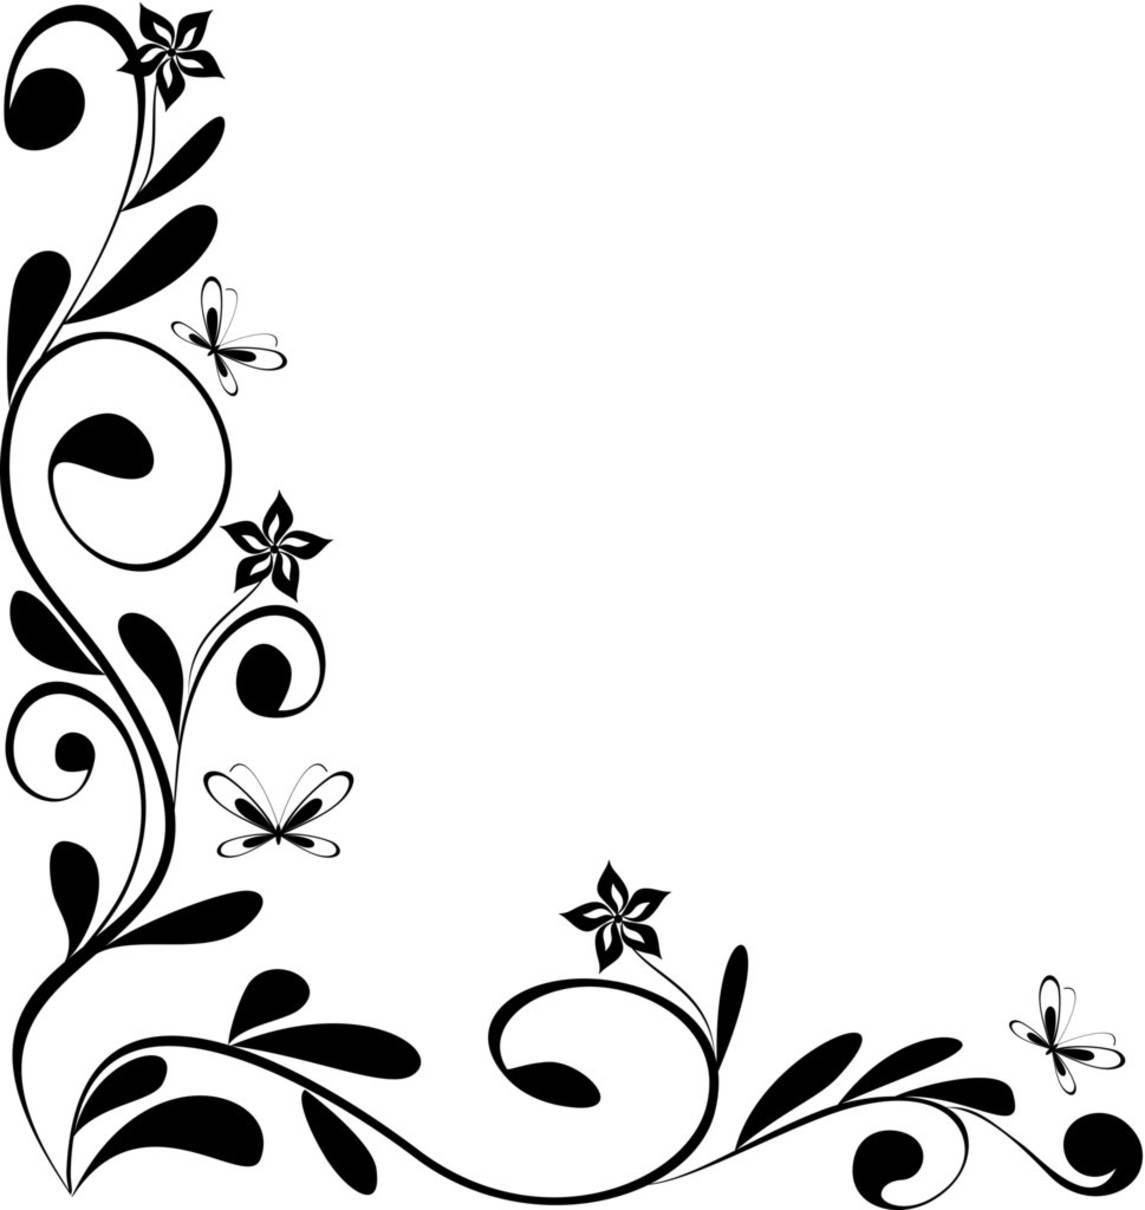 Page Border Designs Flowers Black And White | Free Download Clip ...